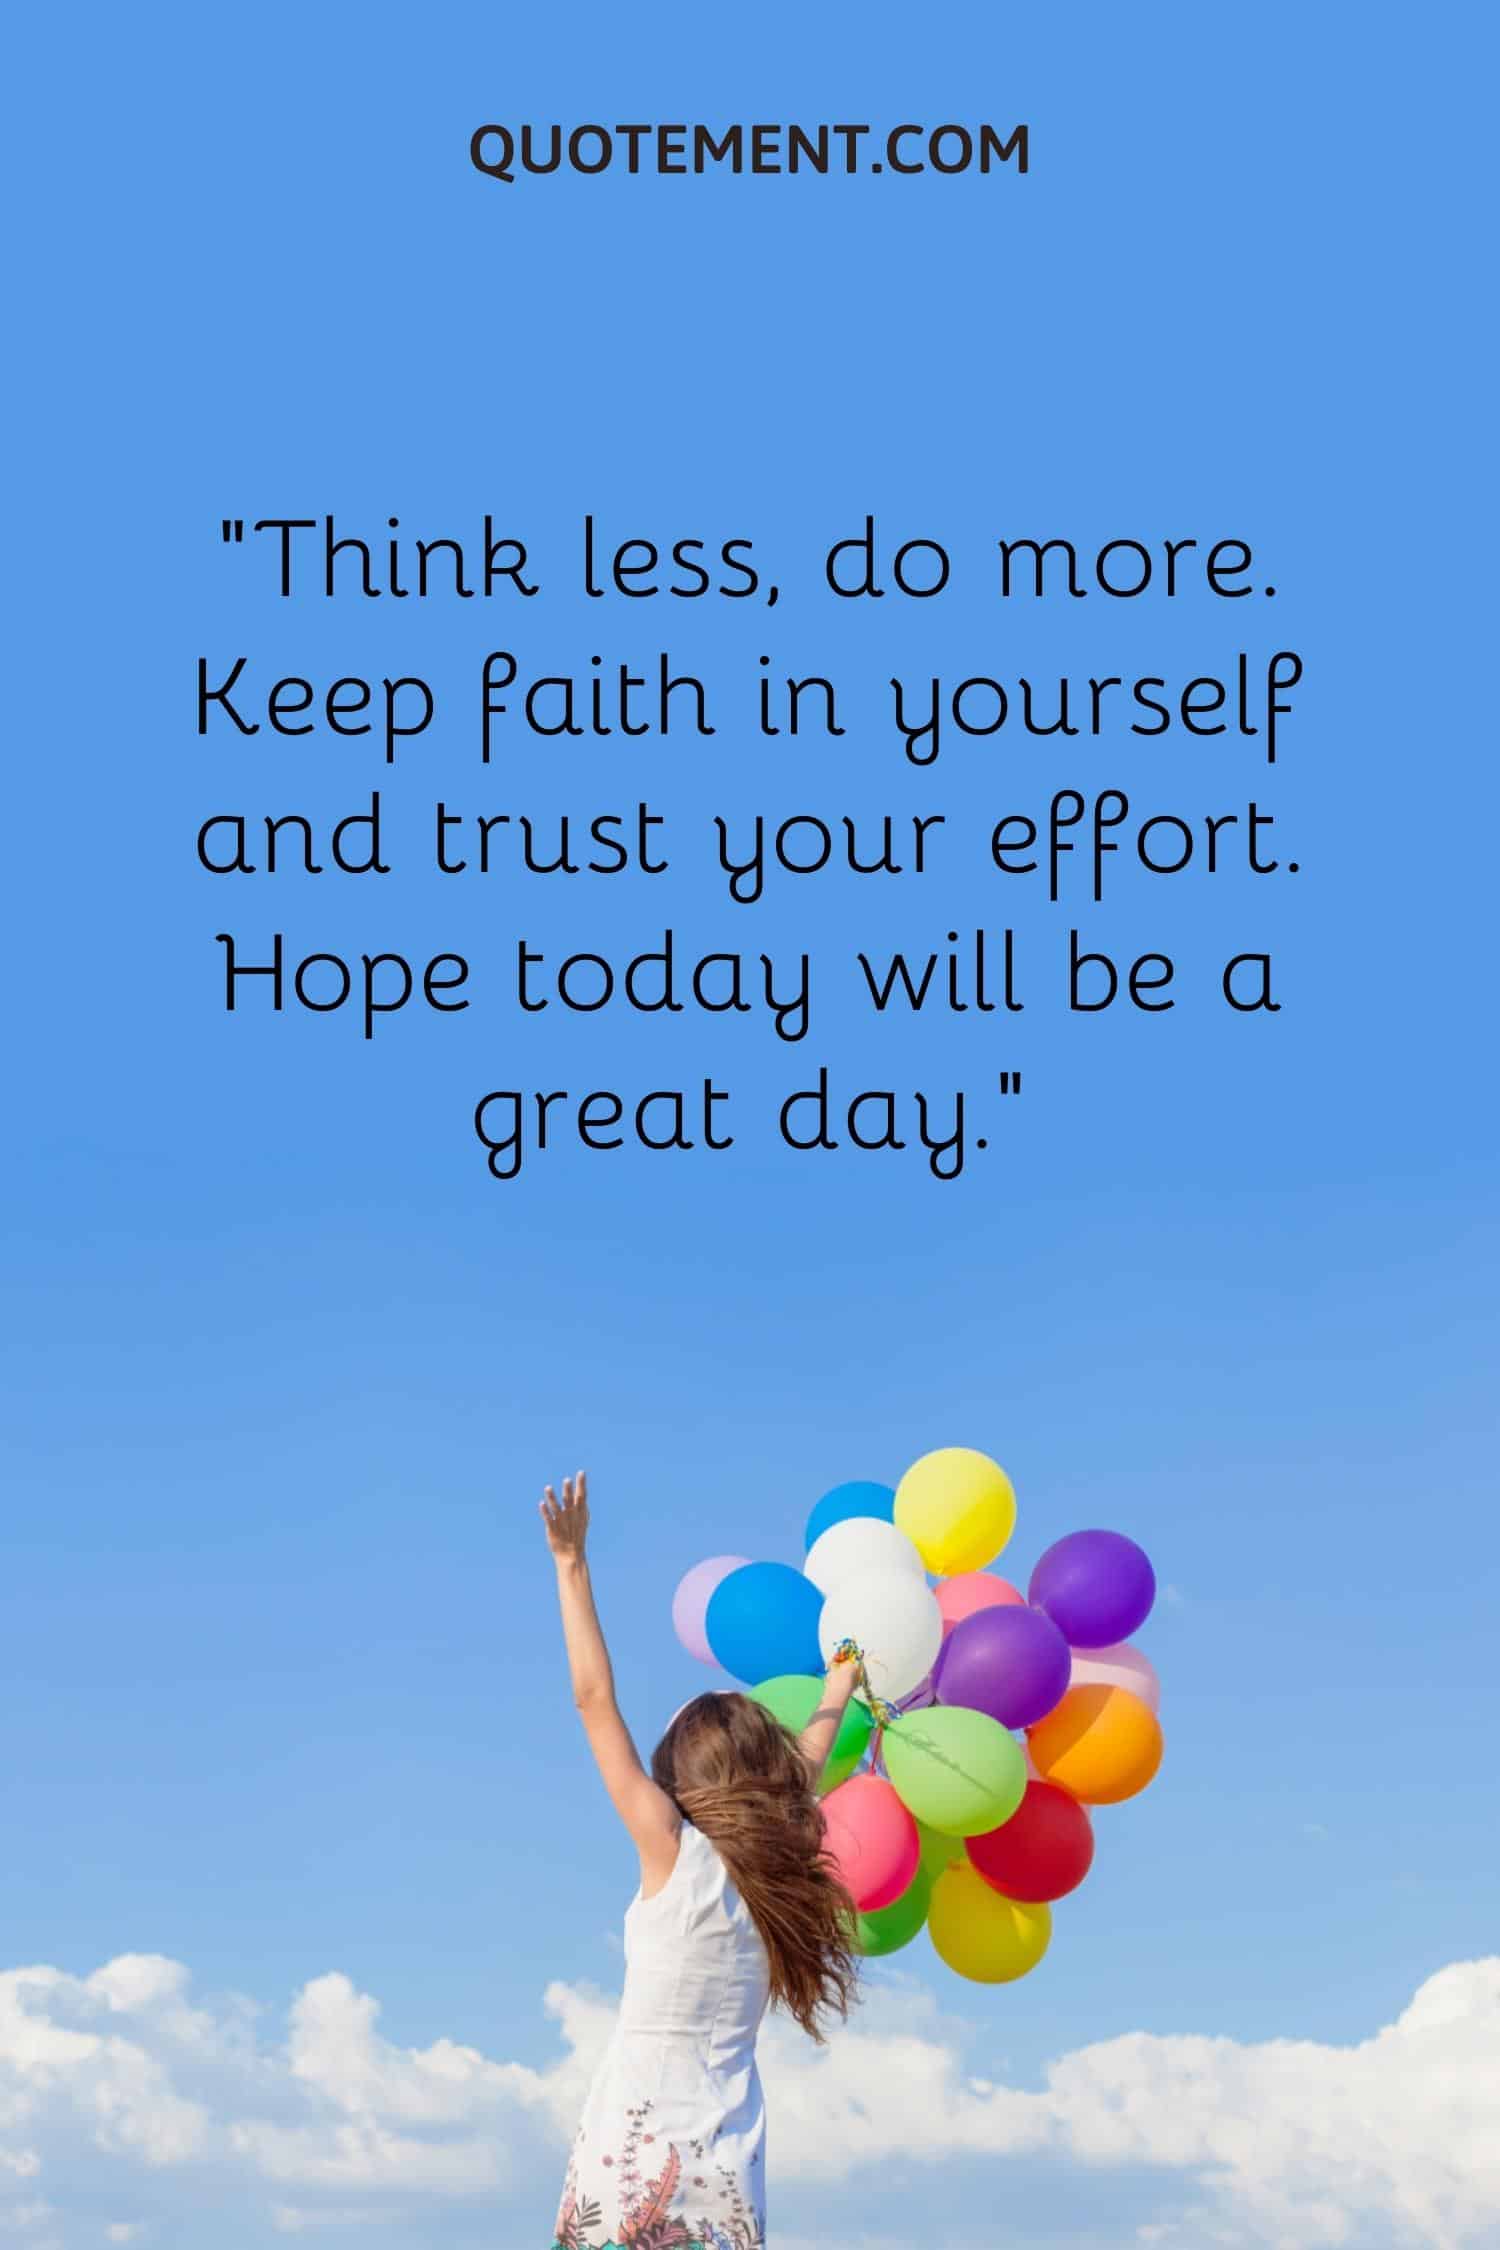 Think less, do more. Keep faith in yourself and trust your effort